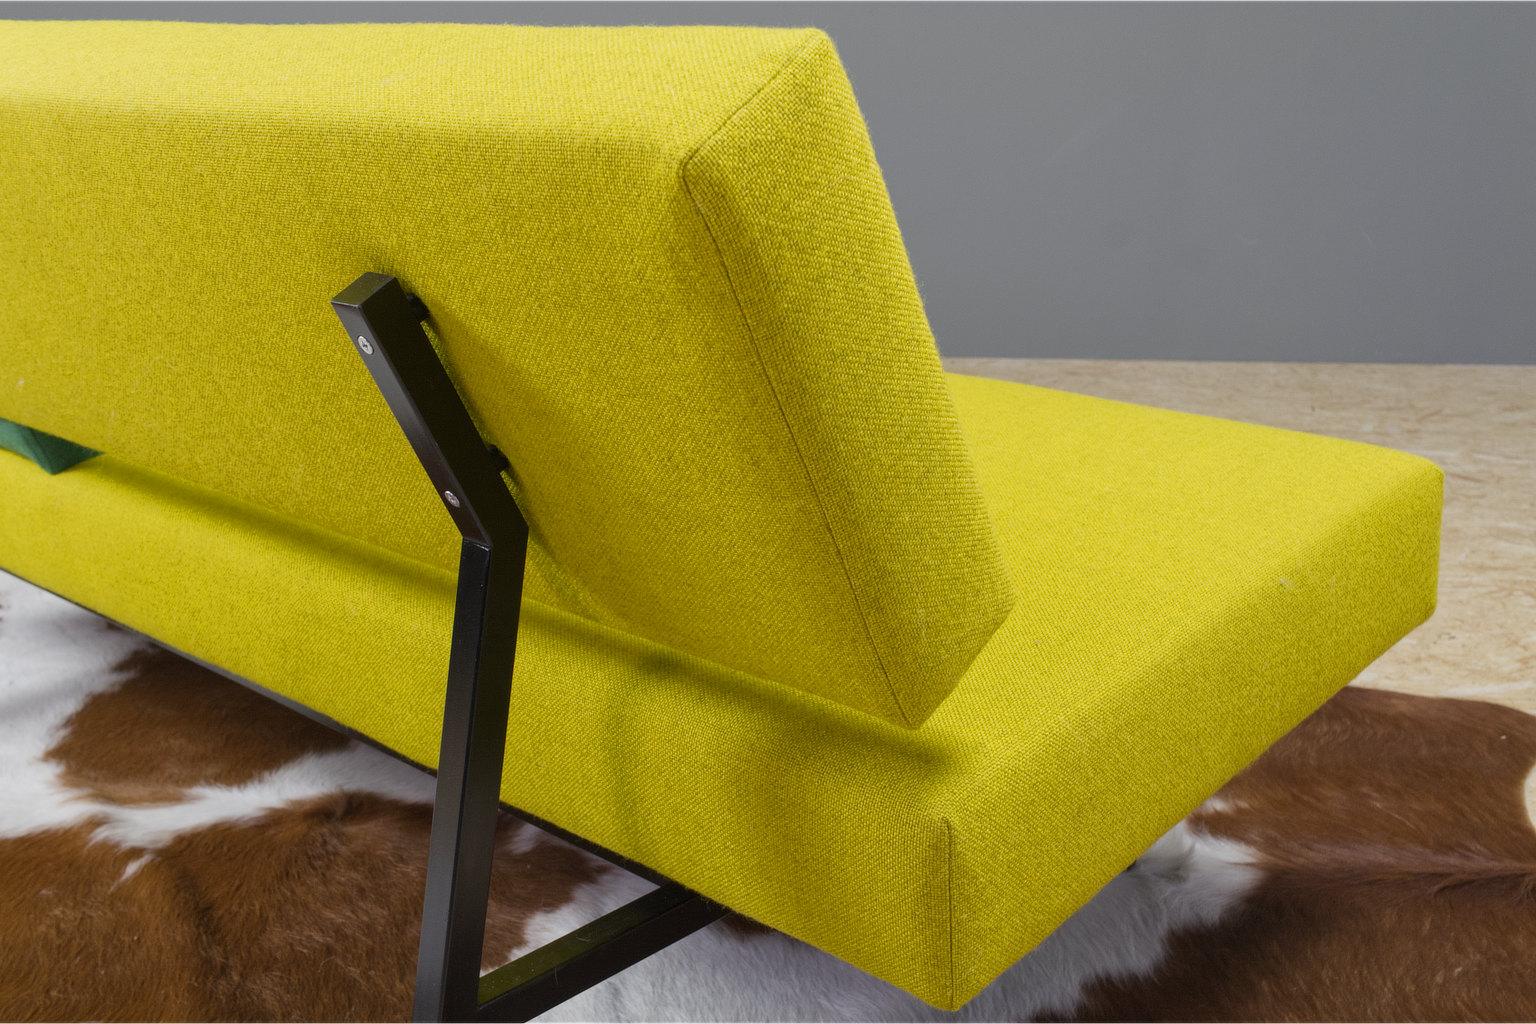 Late 20th Century Martin Visser BZ53 Sofa in New Yellow Wool and Black Frame 1970s Spectrum For Sale